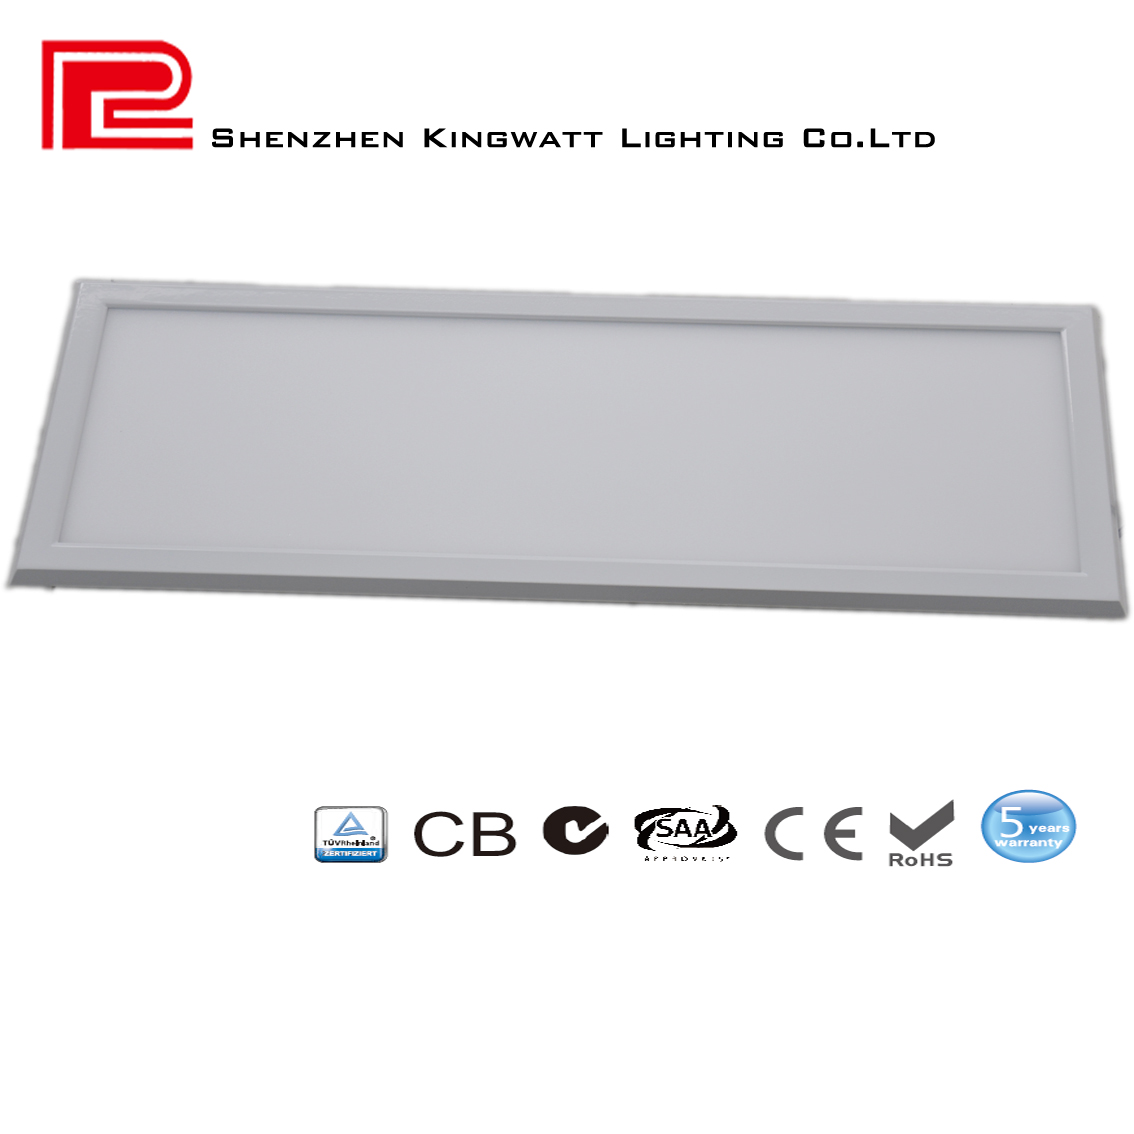 CB/CTEL/SAA/RoHS 100Lm/W LED Panel Light，600mm*600mm with 35W